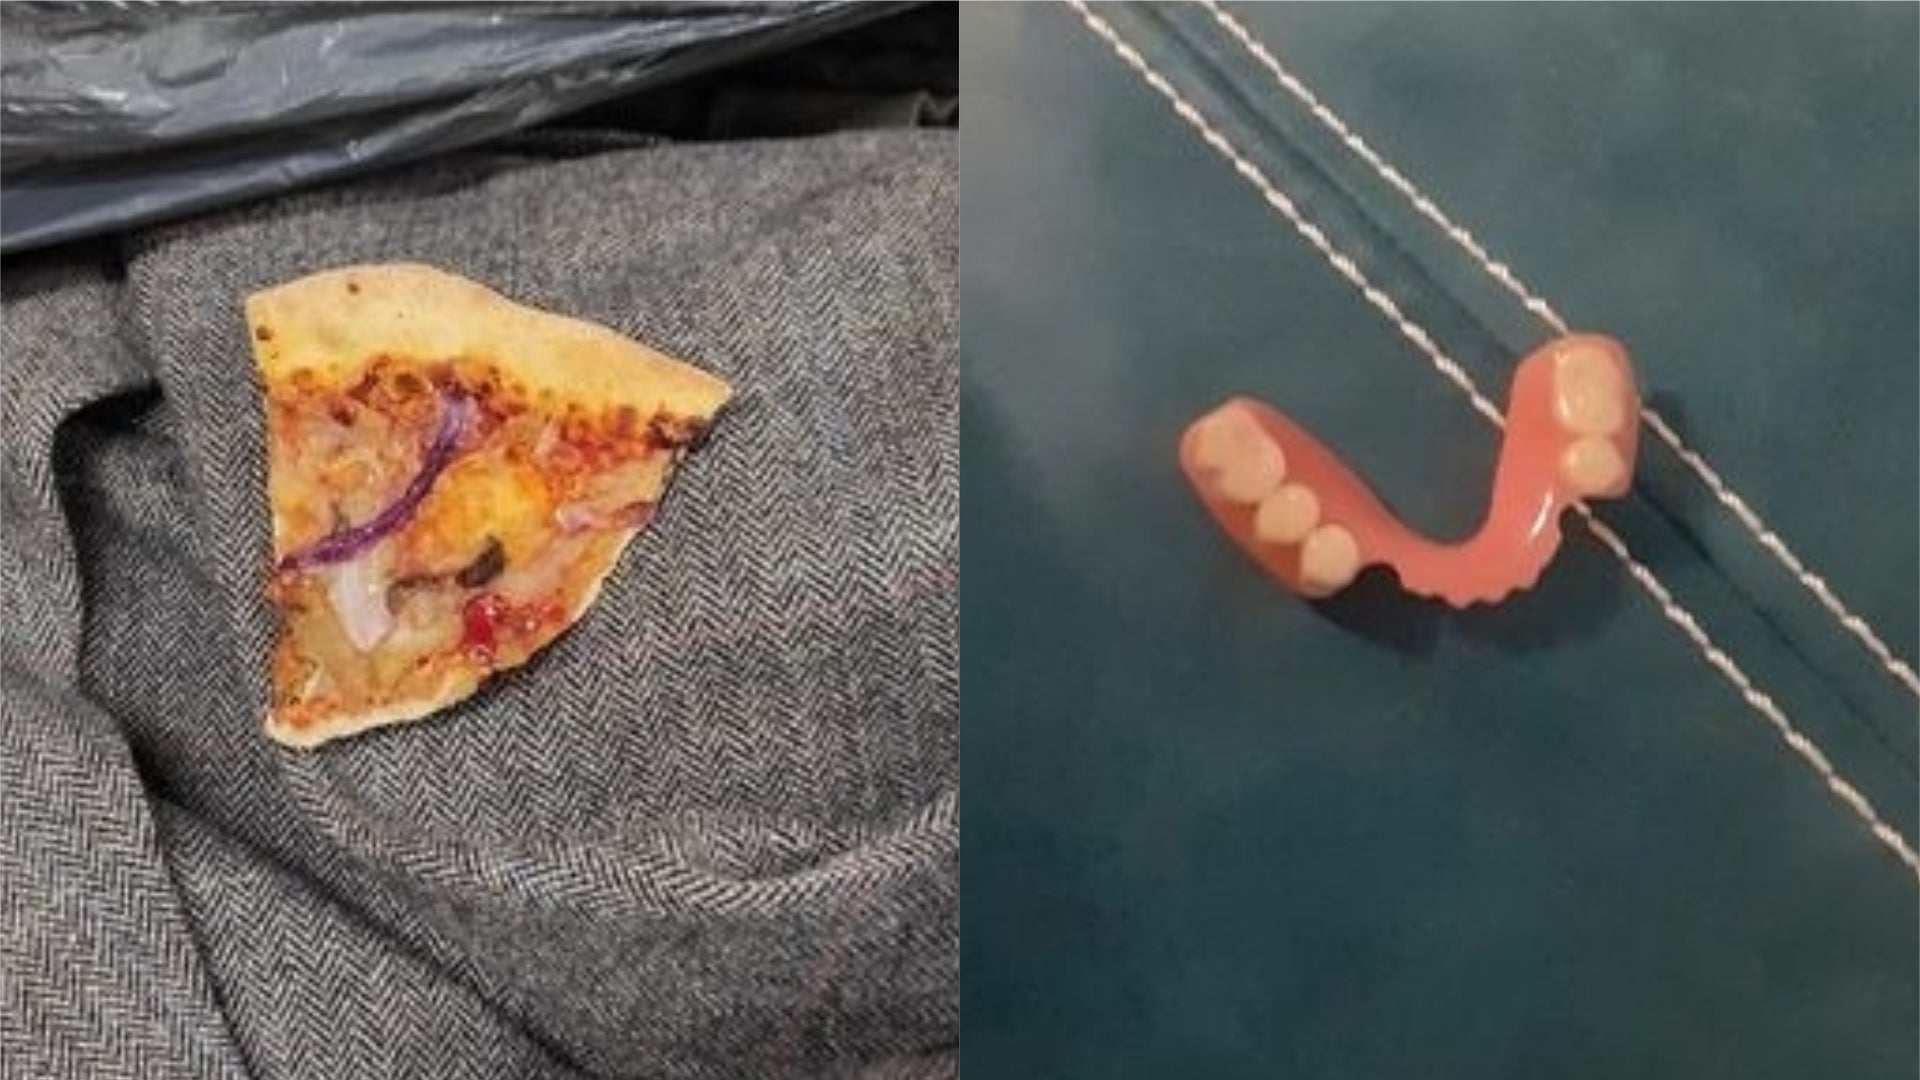 A slice of pizza was found in the pocket of a jacket donated to Barnardo’s